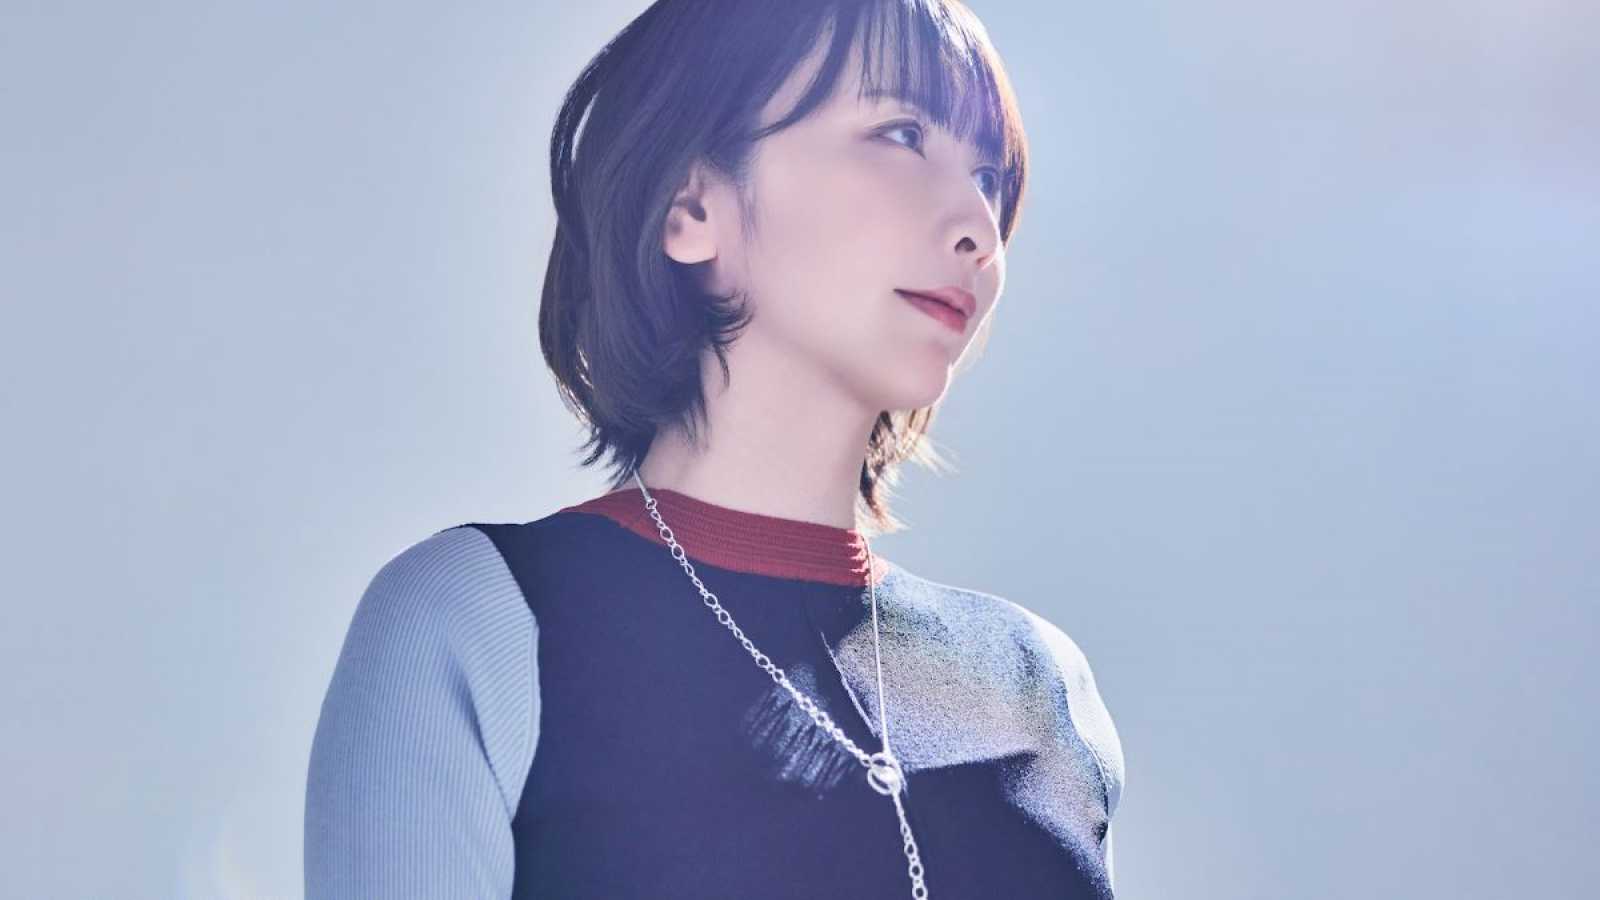 New Digital Single from Eir Aoi © Eir Aoi. All rights reserved.